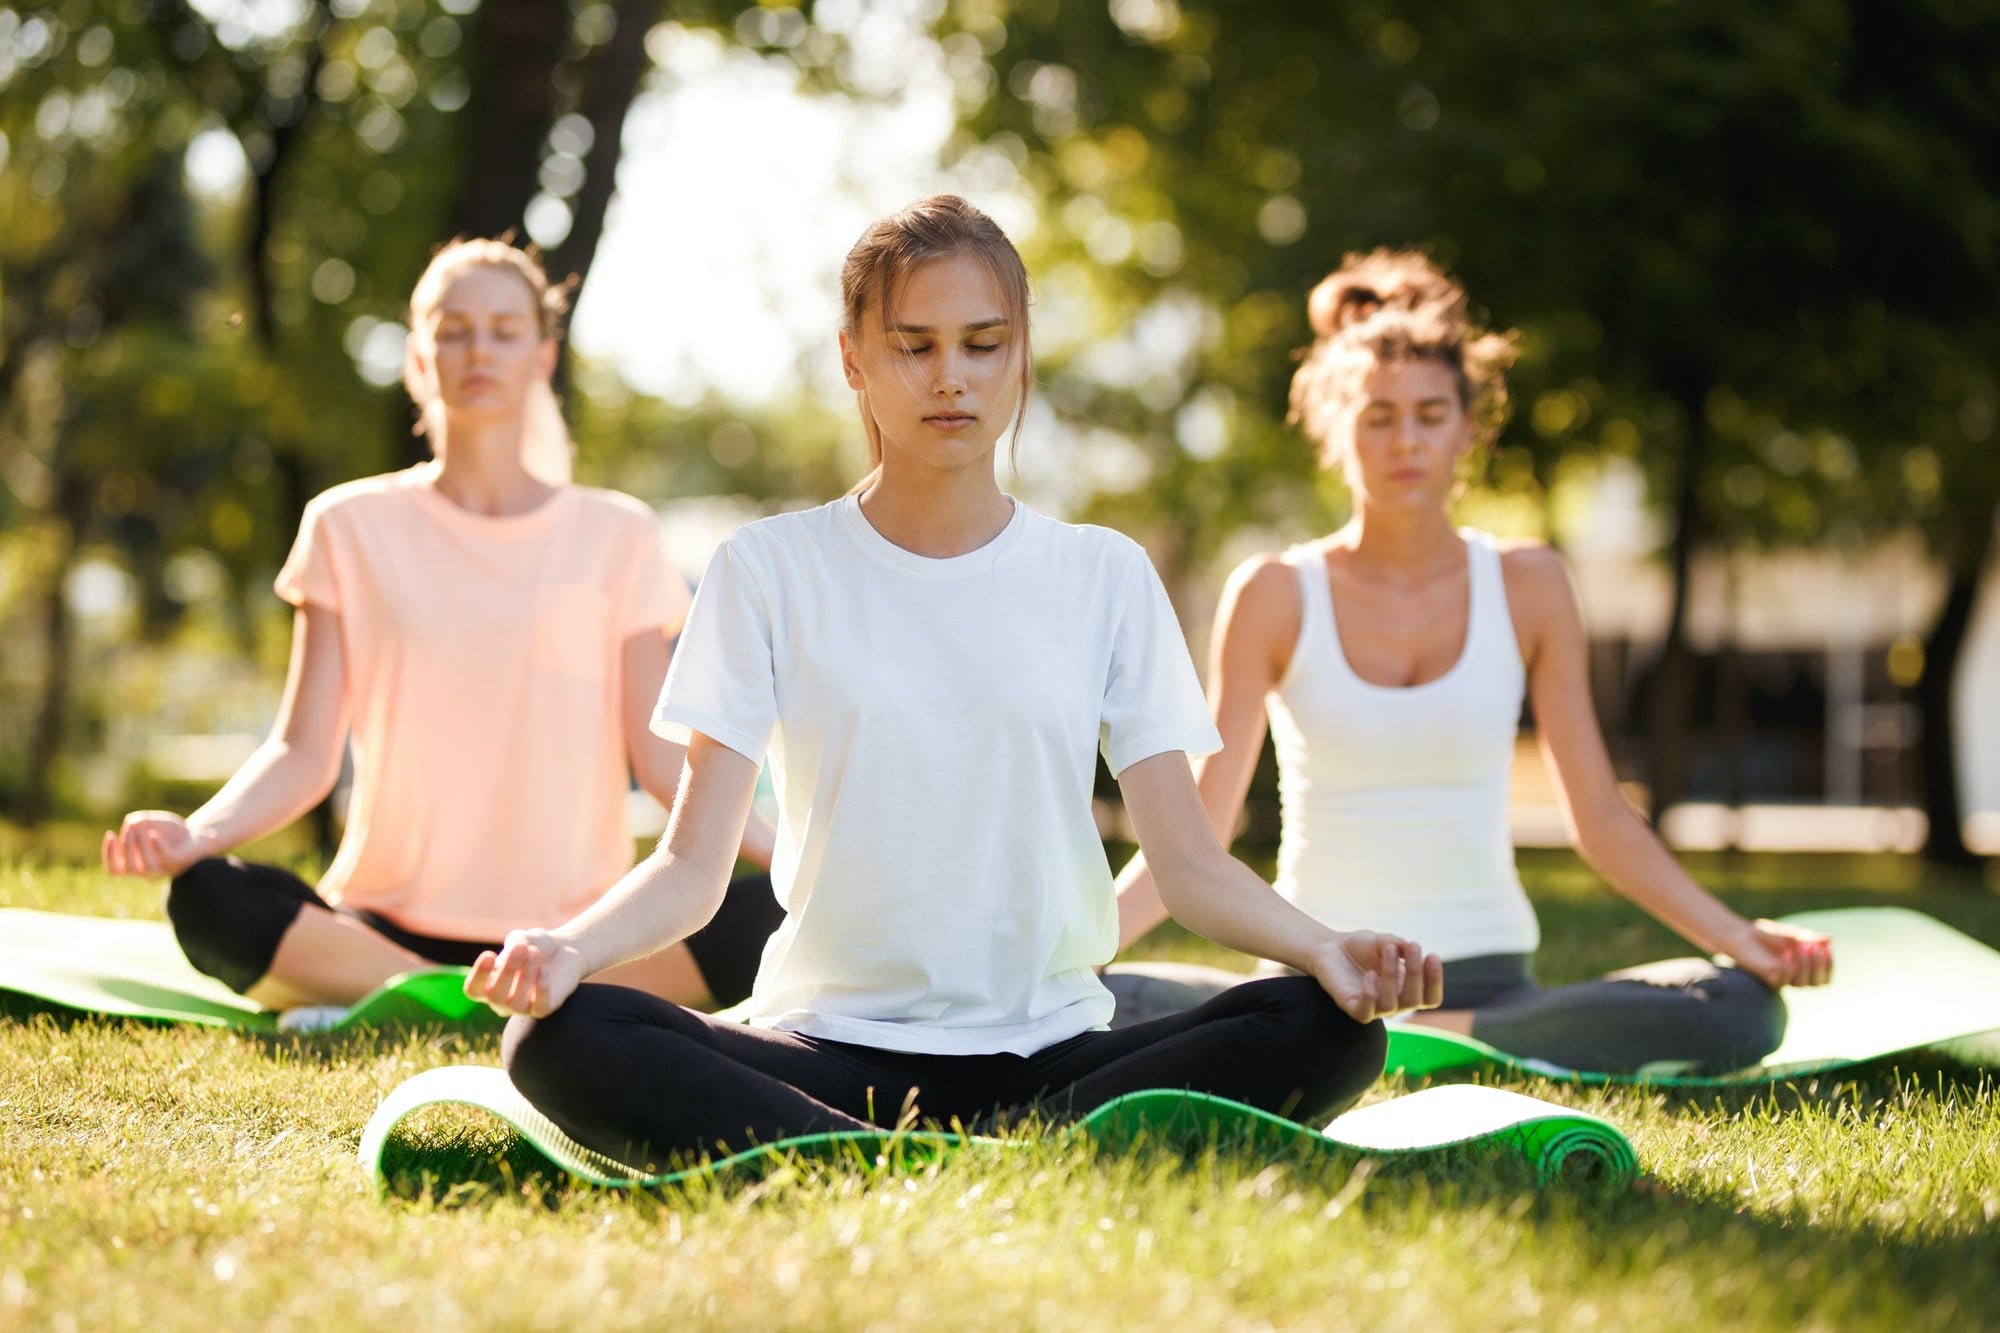 Group of young women practicing yoga, morning meditation in nature at the park